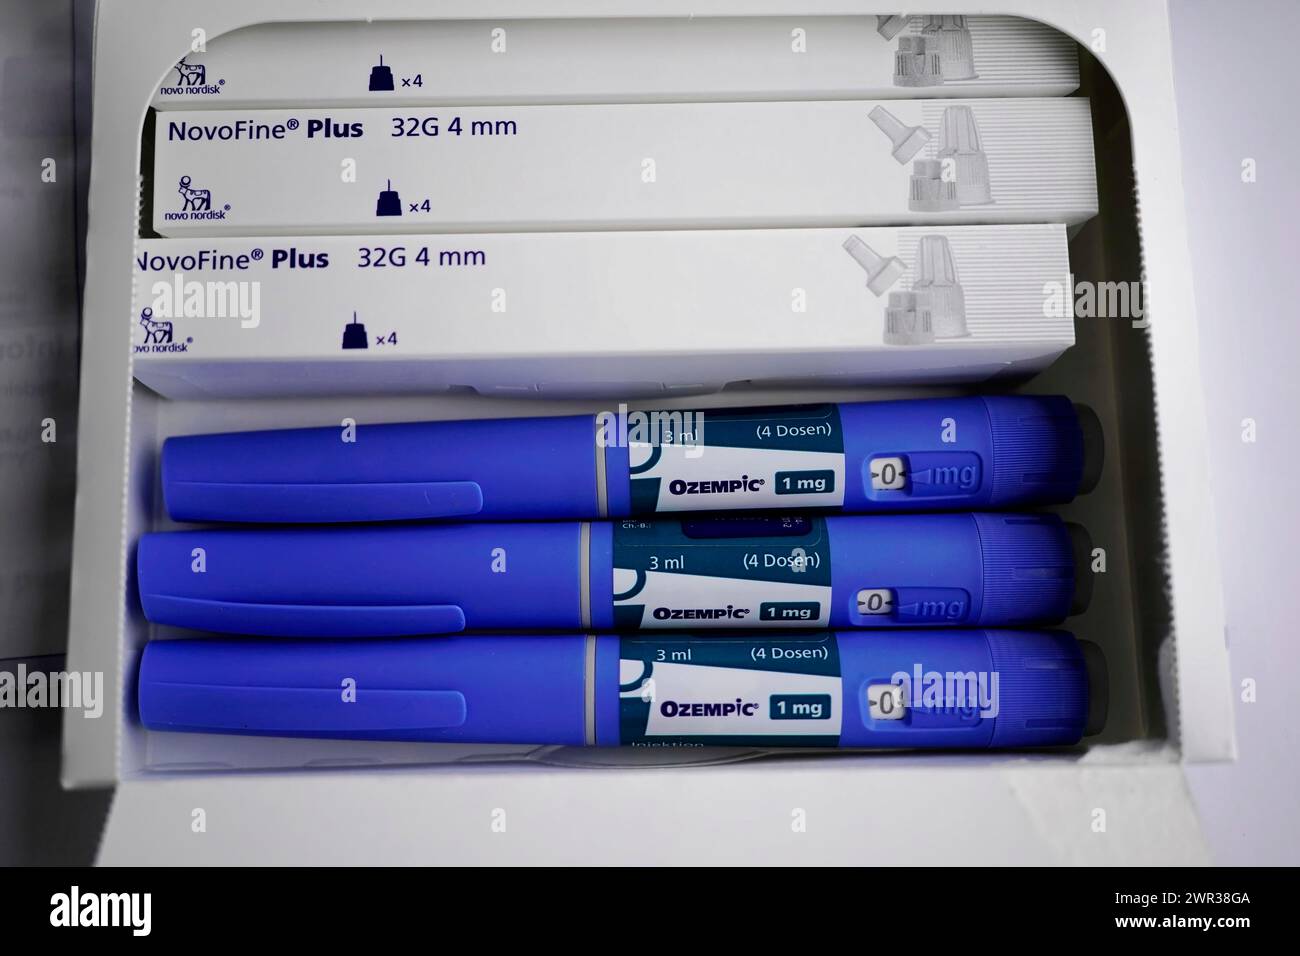 A medical set with Ozempic insulin pens and NovoFine Plus needles in packaging, for diabetes 2 patients, Stuttgart, Baden-Wuerttemberg, Germany Stock Photo